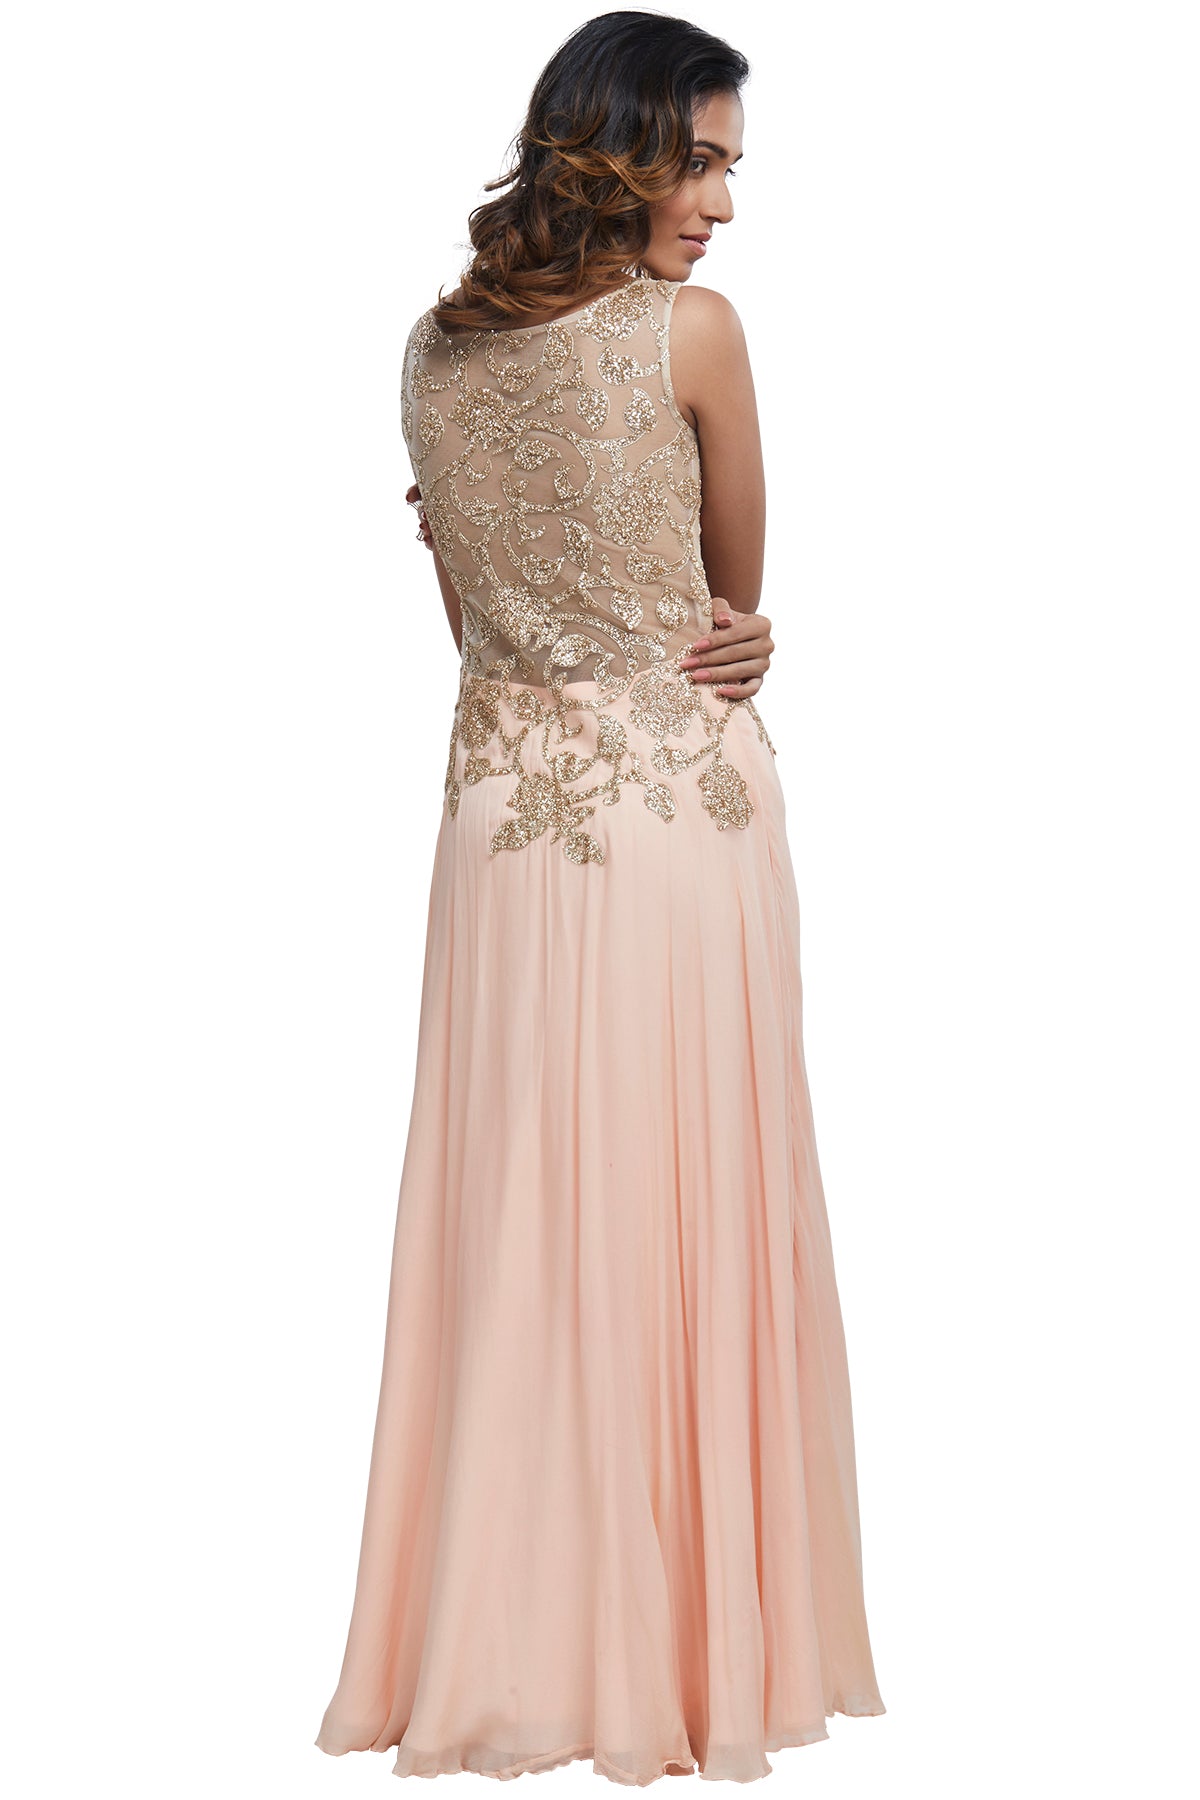 Peach Embroidered Gown